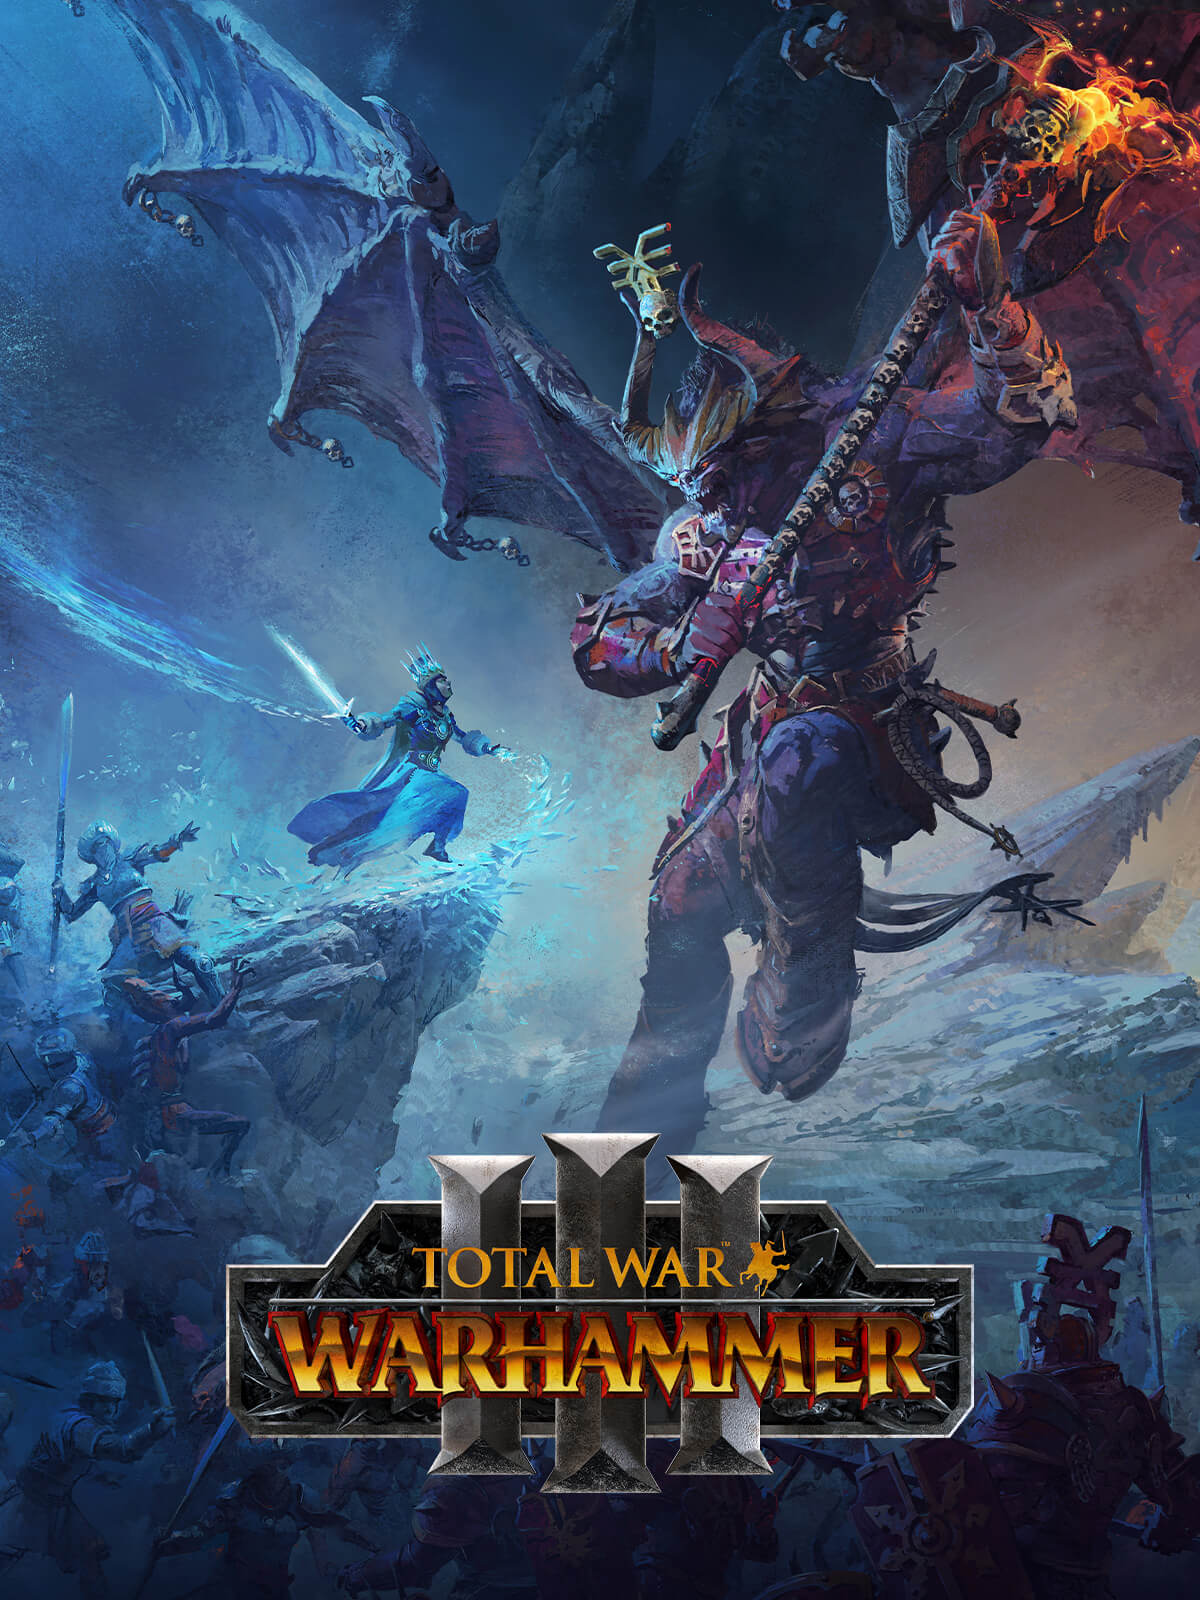 Total War: WARHAMMER III for Mac and Linux - Features